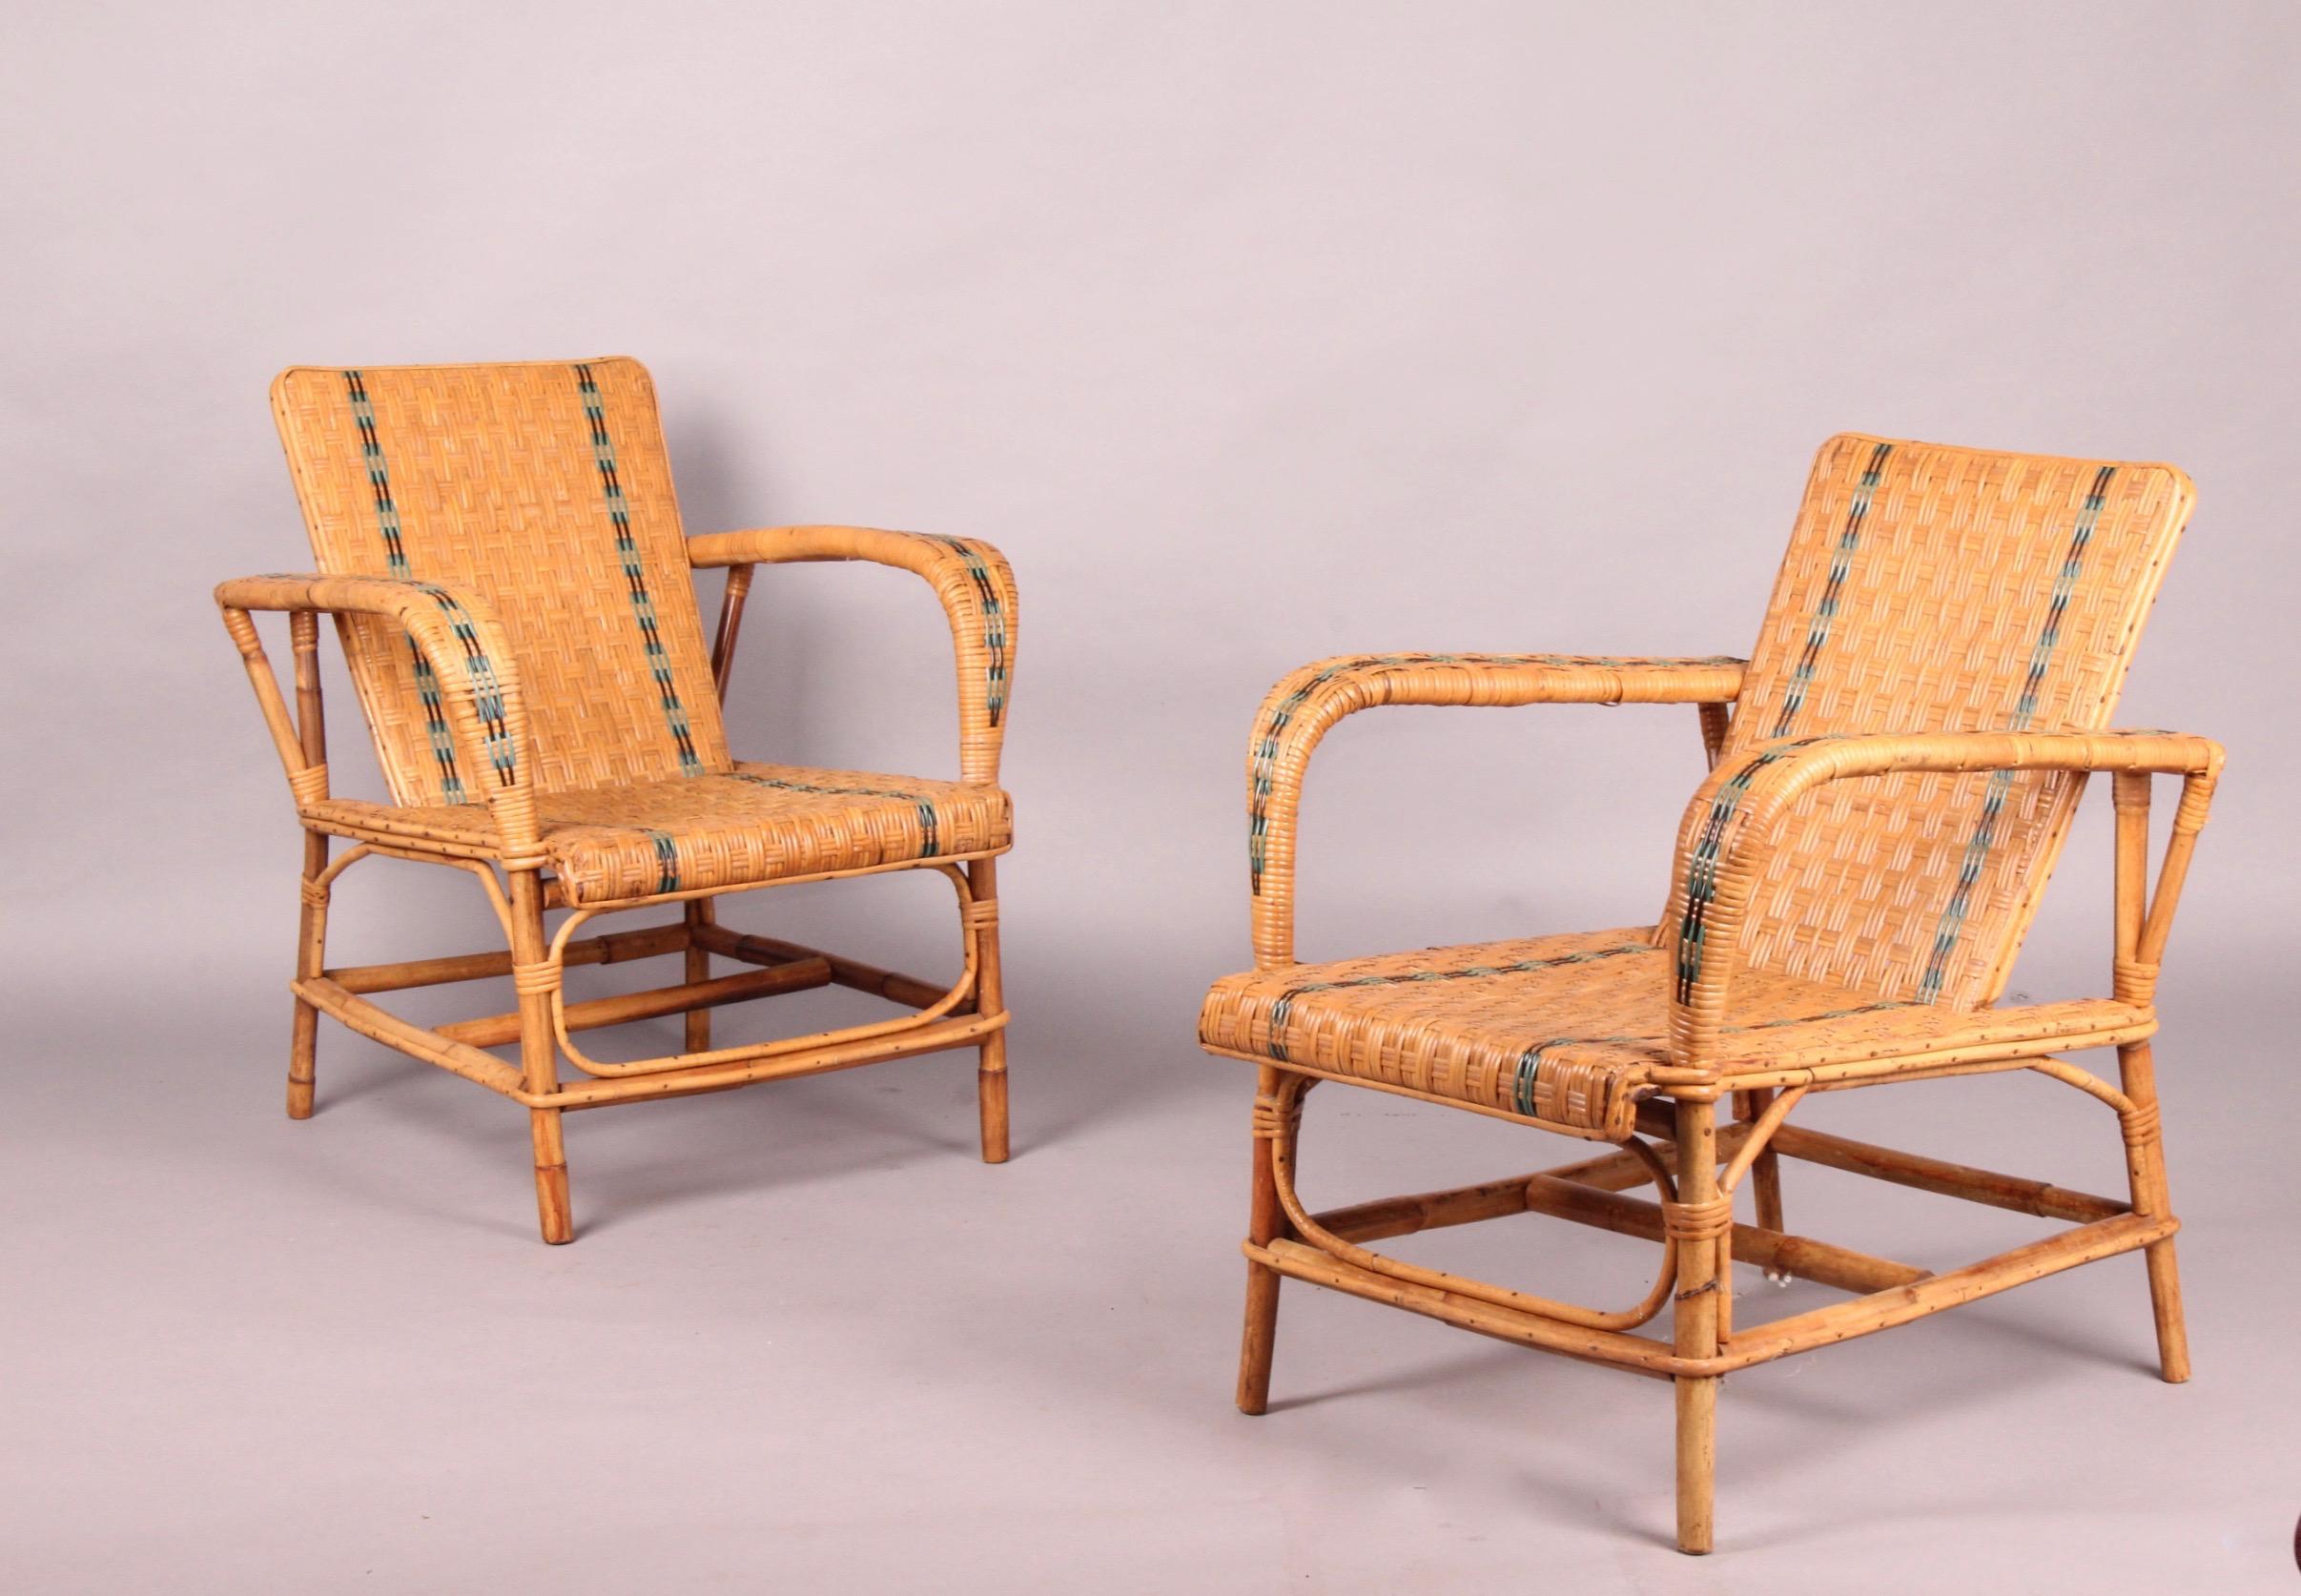 Pair of rattan armchairs.